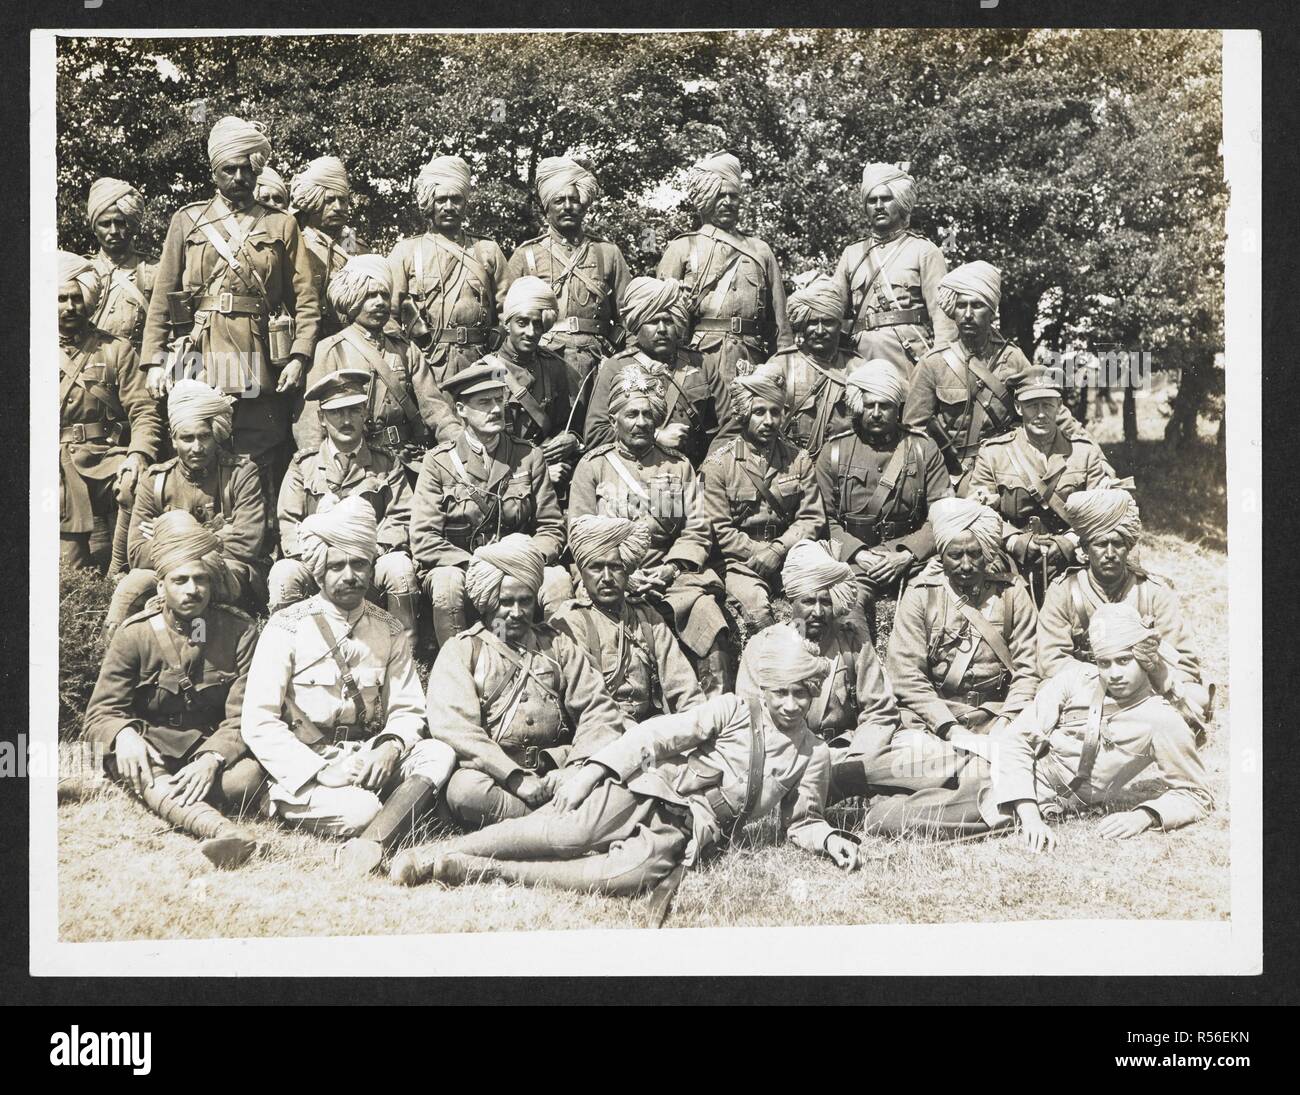 Officers of the Jodhpur Lancers [Linghem, France]. A group portrait, in uniform, seated in the open air, 28th July 1915 . Record of the Indian Army in Europe during the First World War. 20th century, 28th July 1915. Gelatin silver prints. Source: Photo 24/(157). Author: Girdwood, H. D. Stock Photo